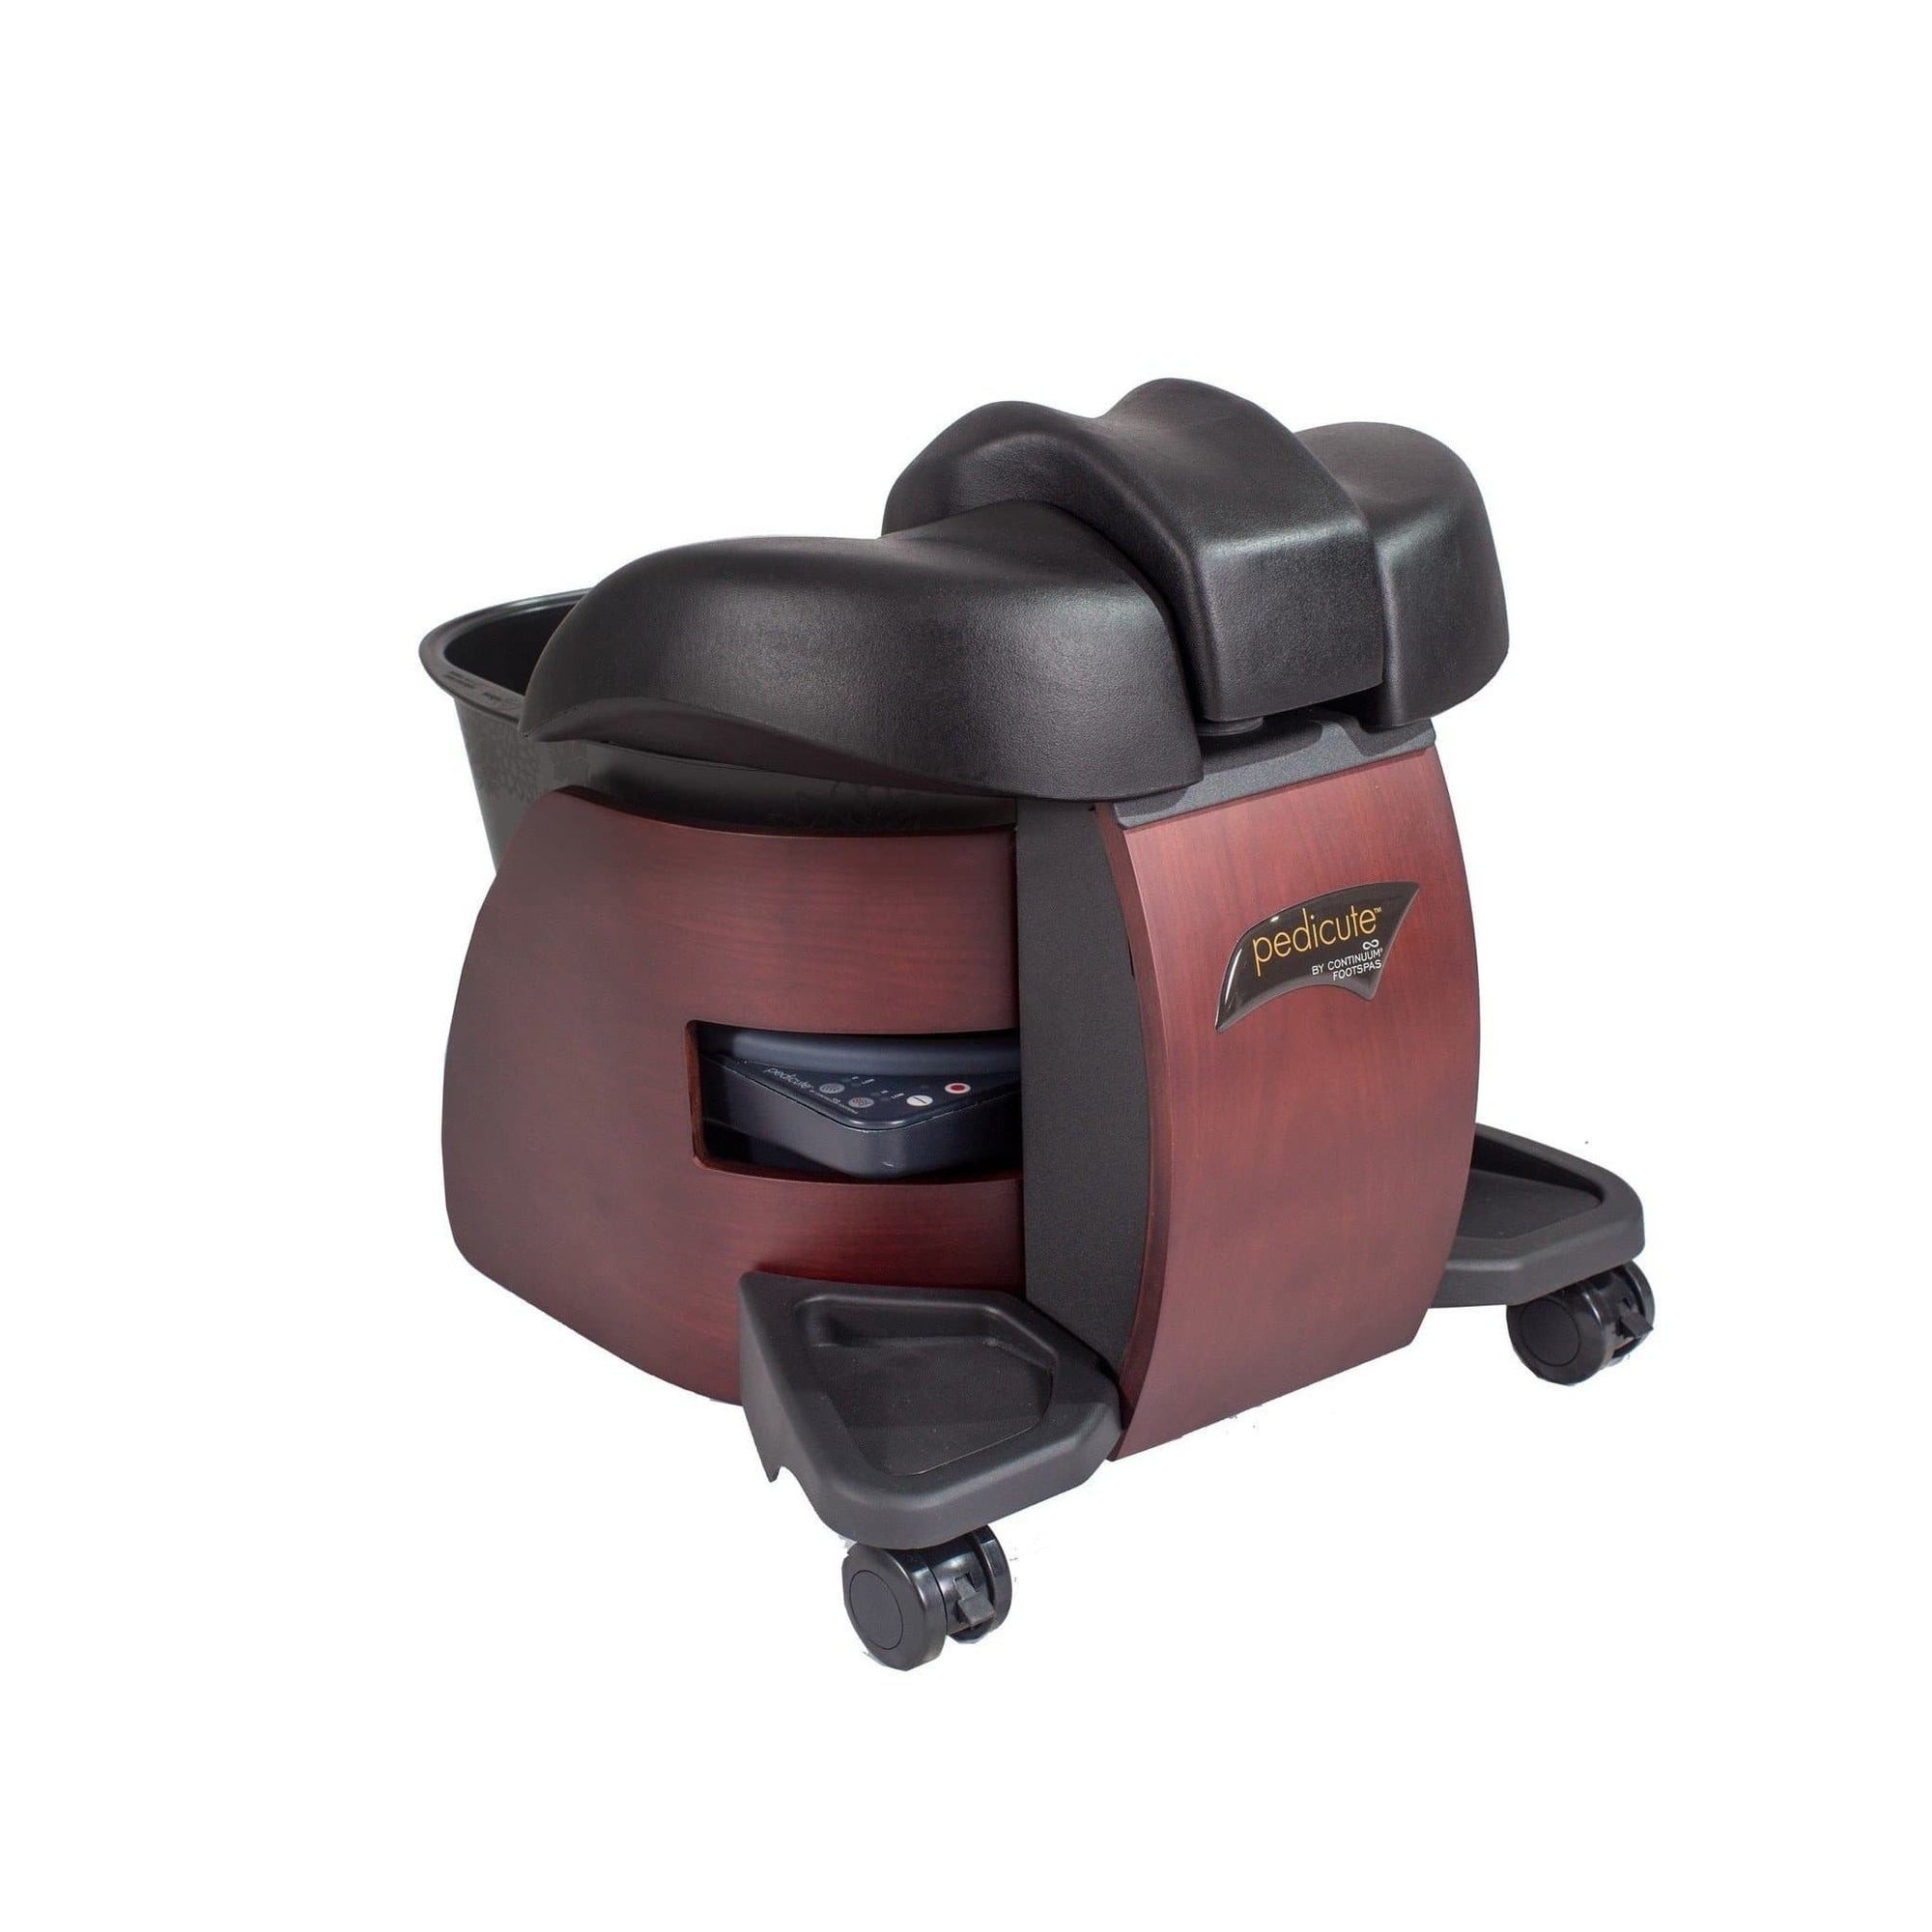 Continuum Continuum Pedicute Deluxe Portable Spa Package Pedicure & Spa Chairs - ChairsThatGive